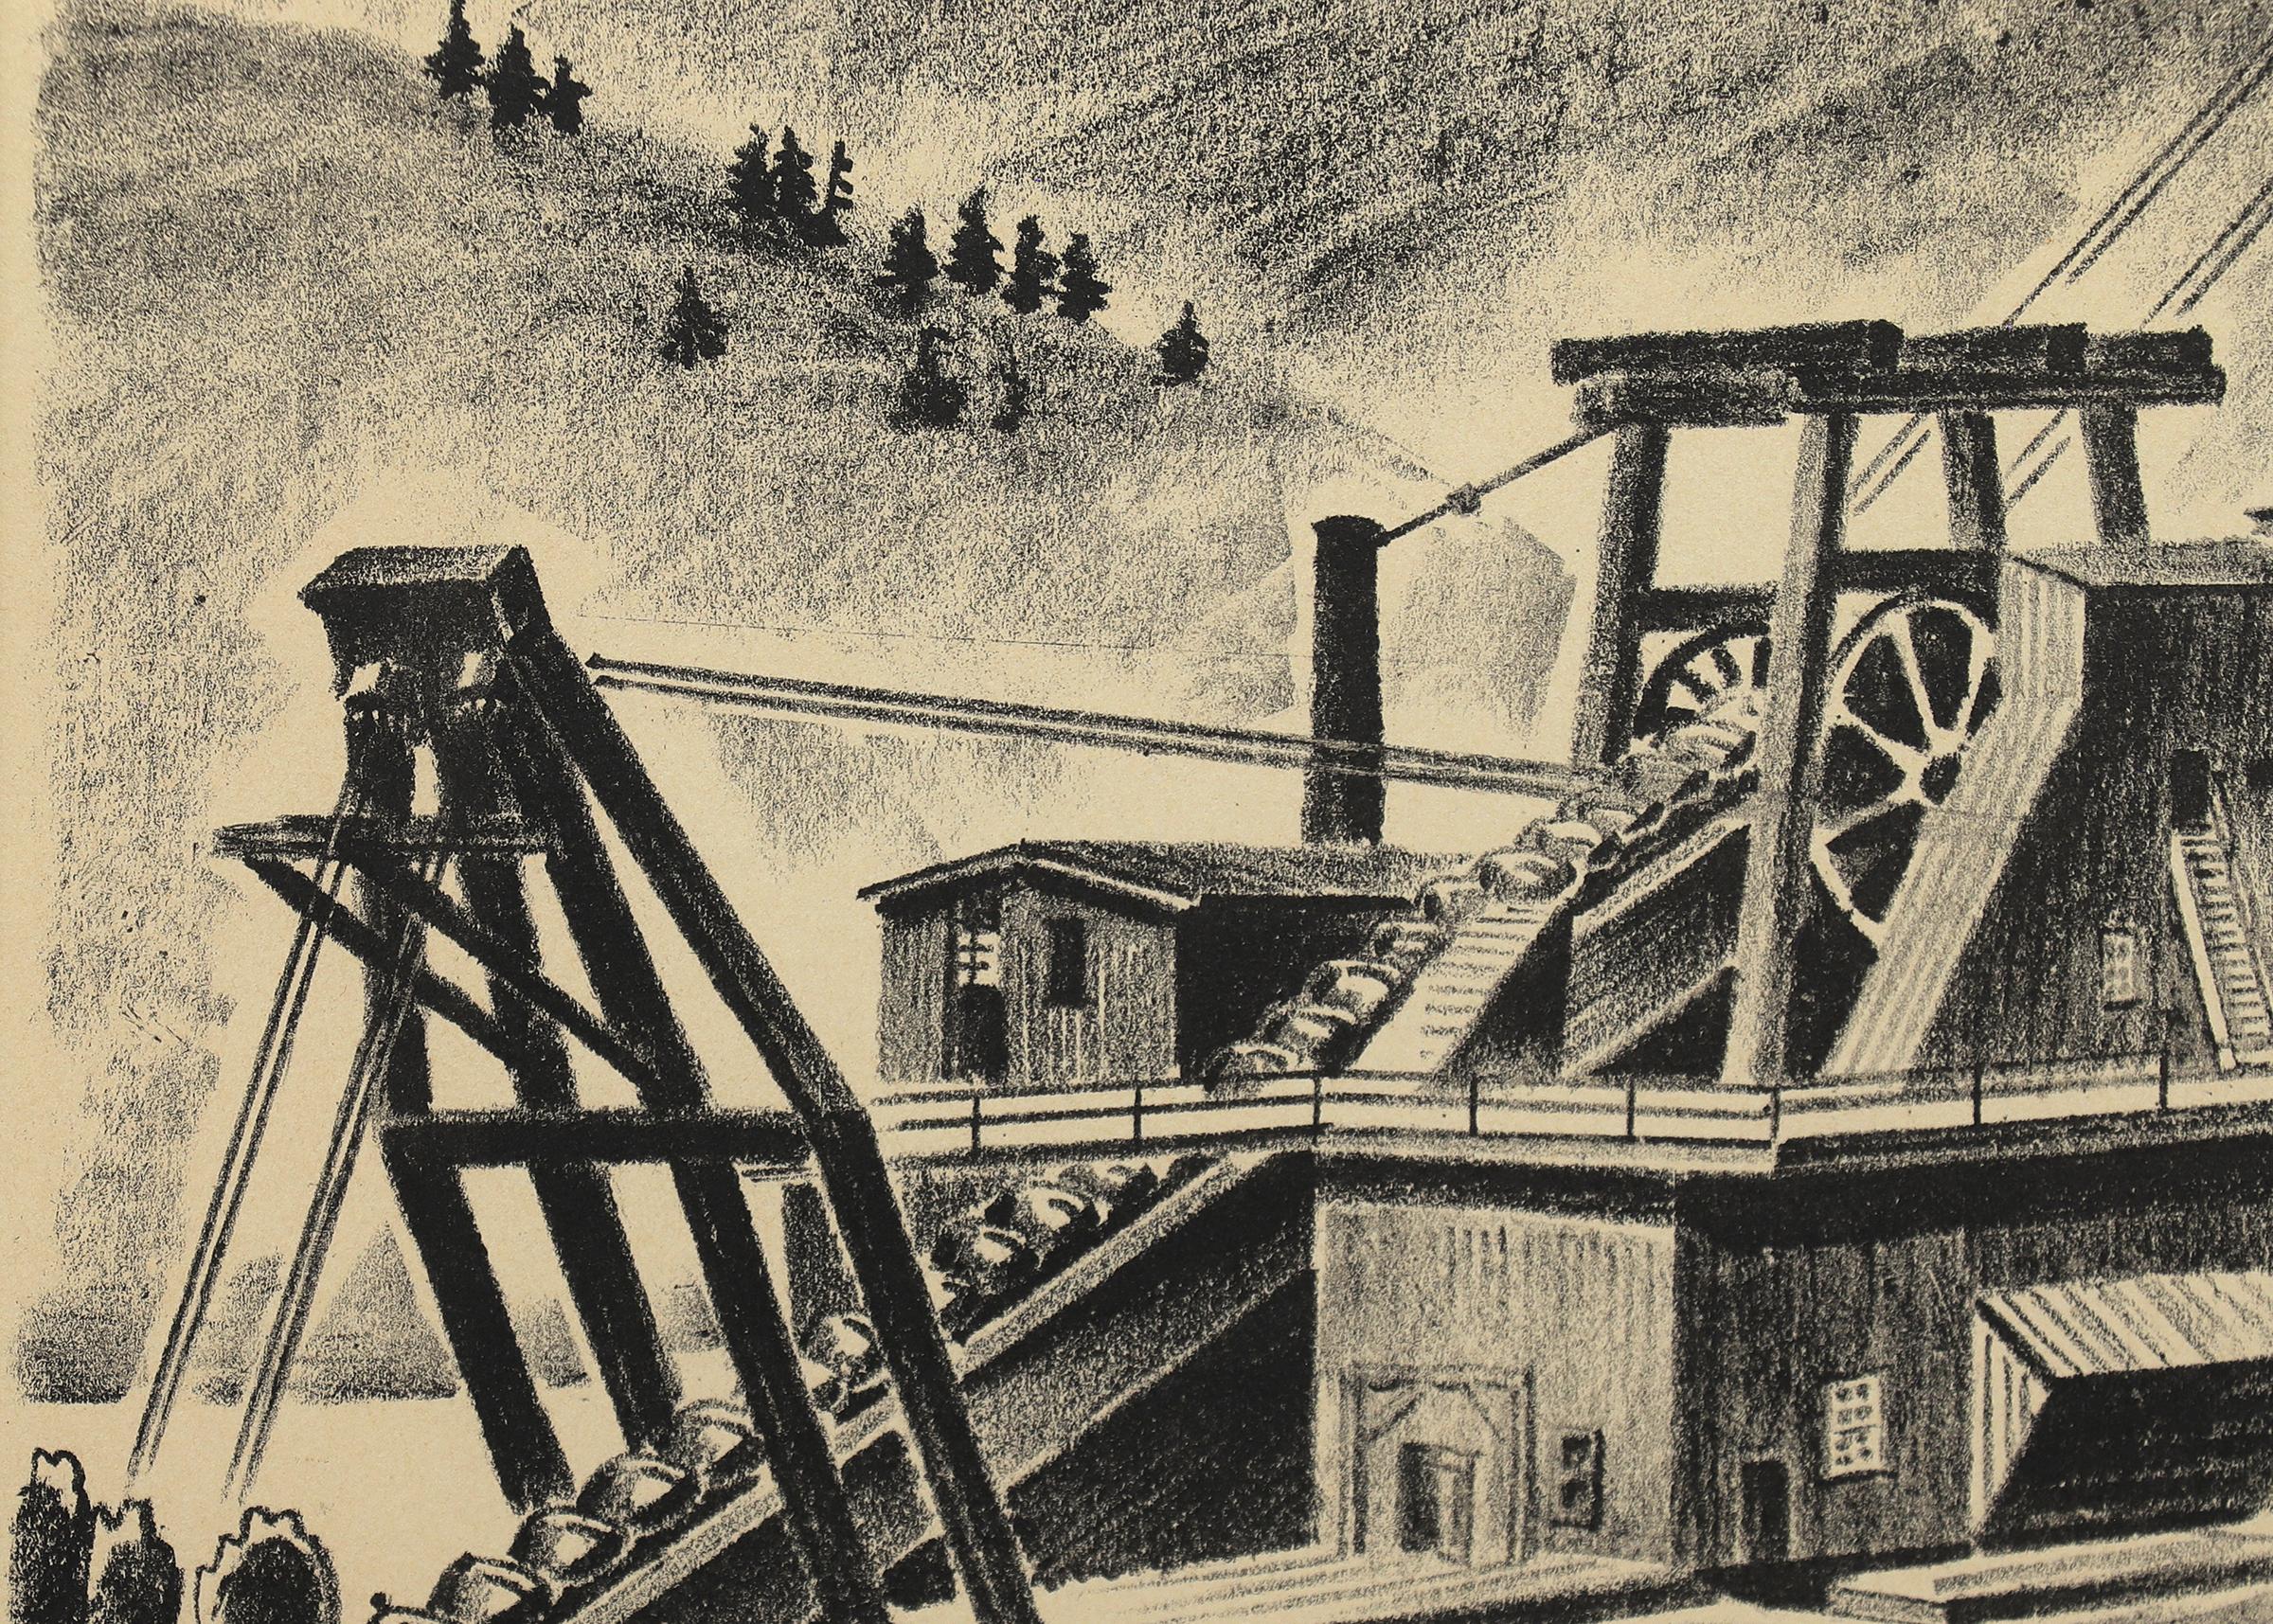 Colorado Gold Dredge, Breckenridge, Signed Black and White Mining Lithograph - American Modern Print by Arnold Ronnebeck